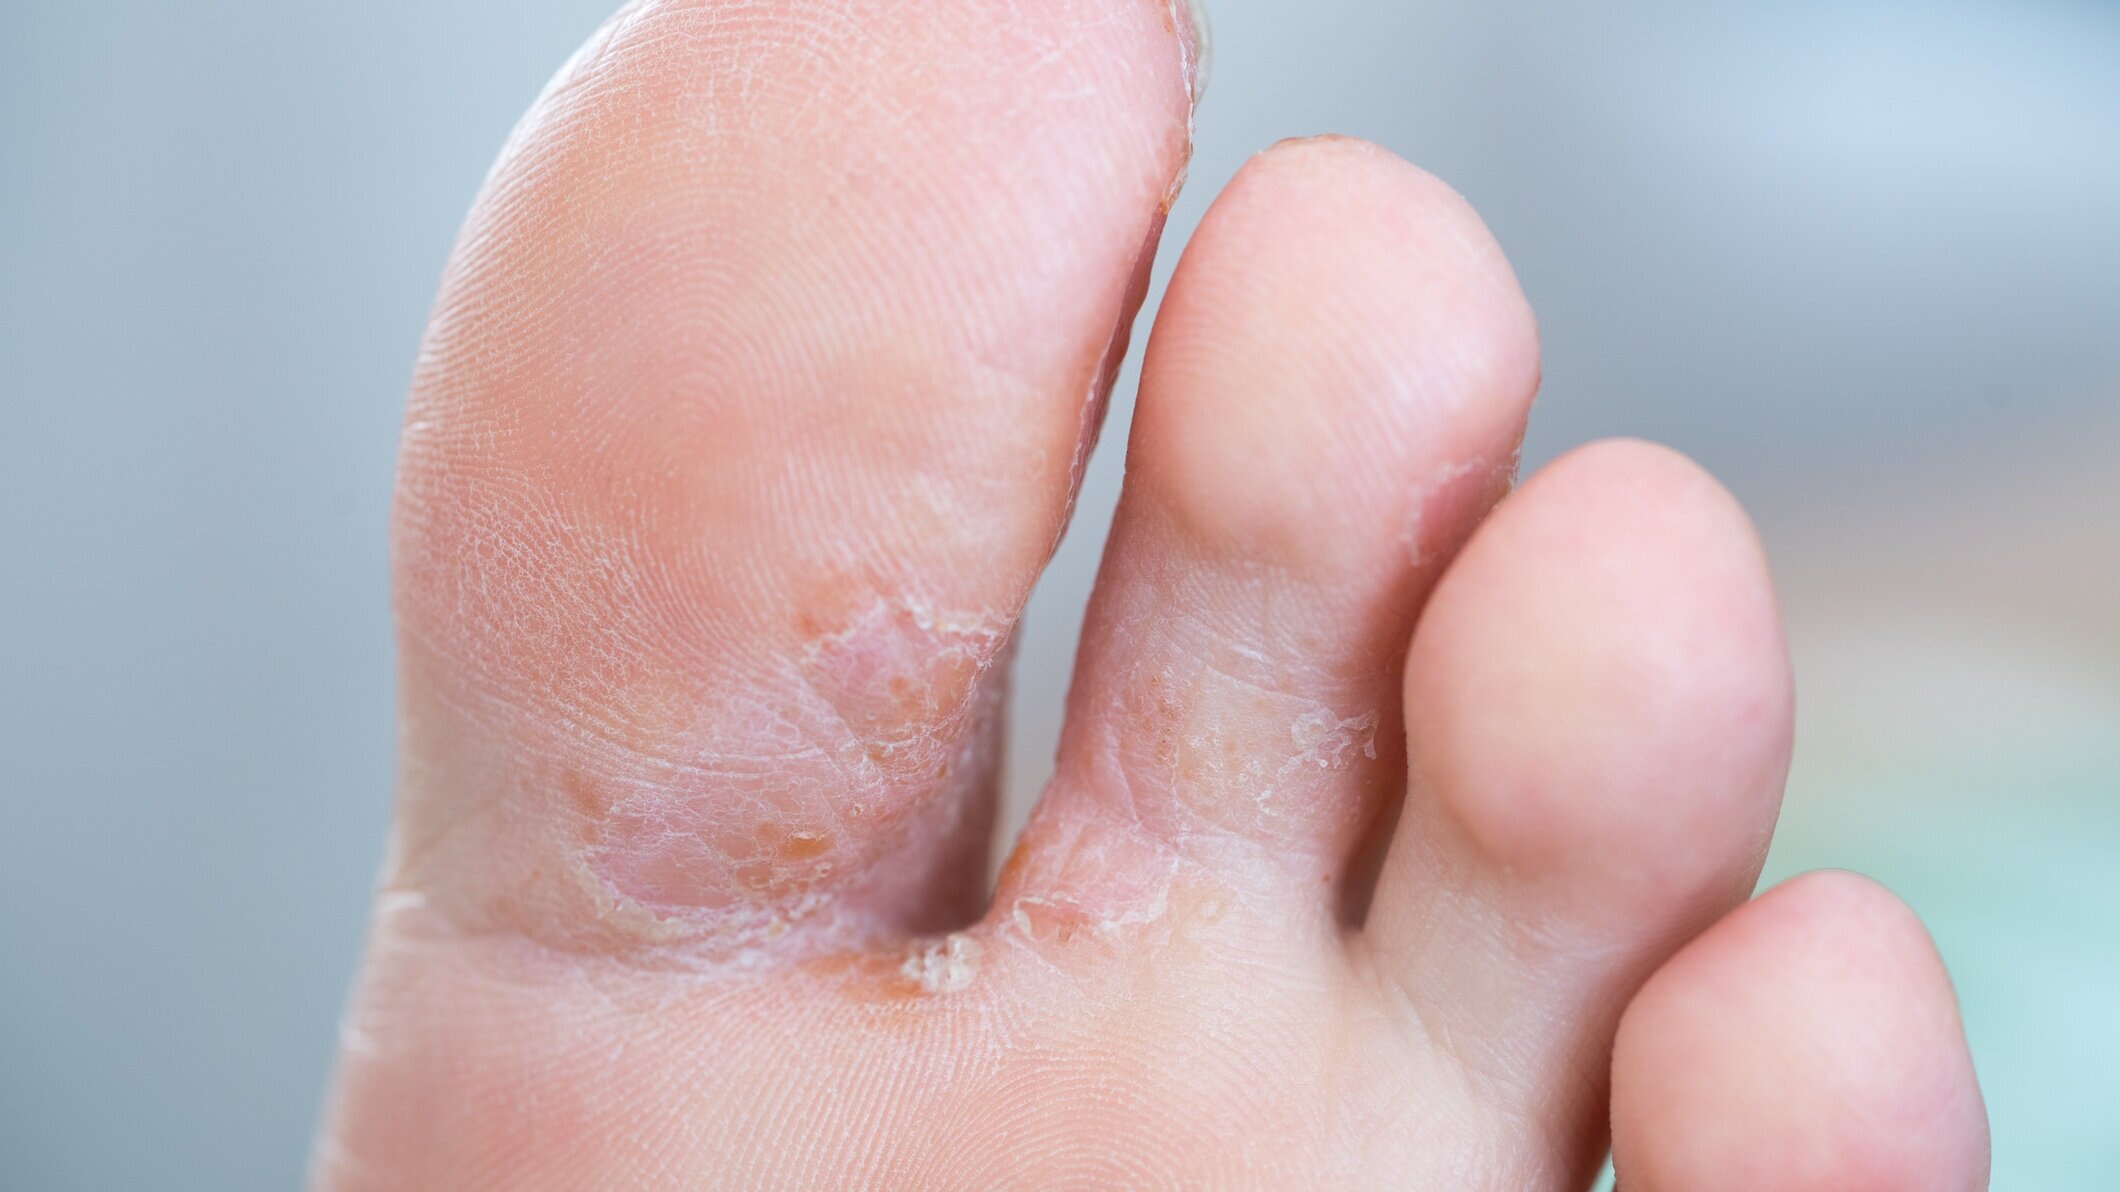 Athletes Foot Treatment In Shepshed — Focus On Feet Foot Care In Shepshed